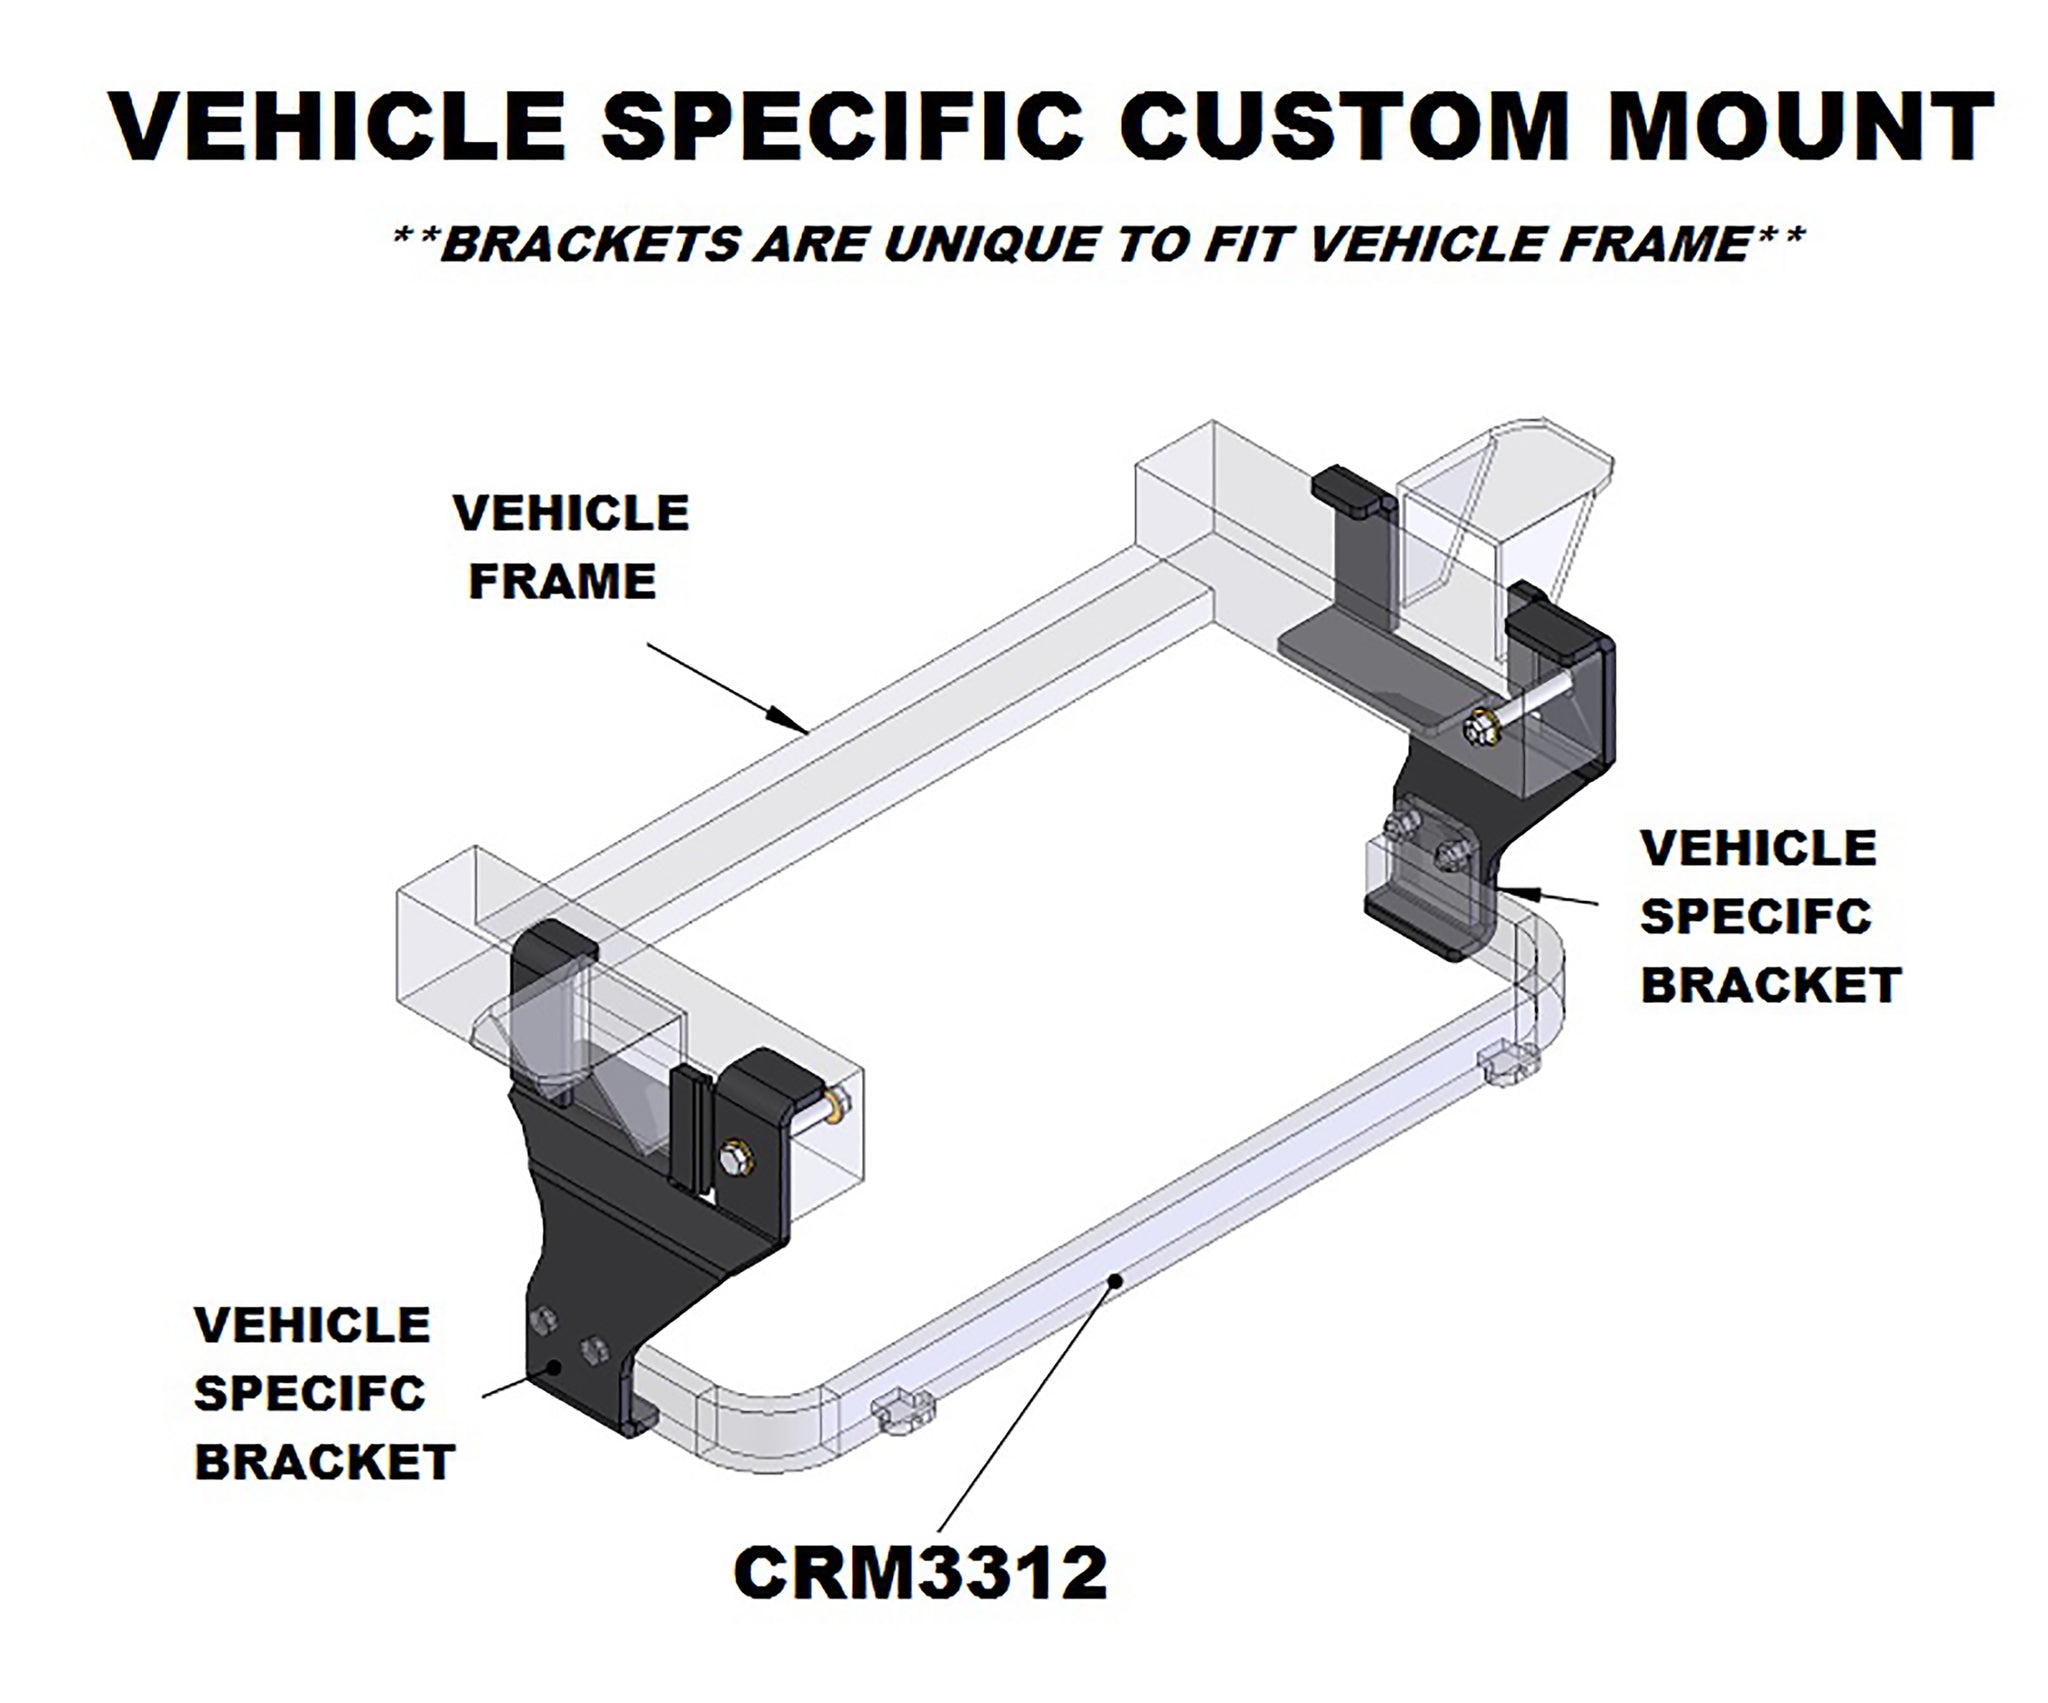 Vehicle Specific Custom Mount (Required for any Custom Mount Plow)